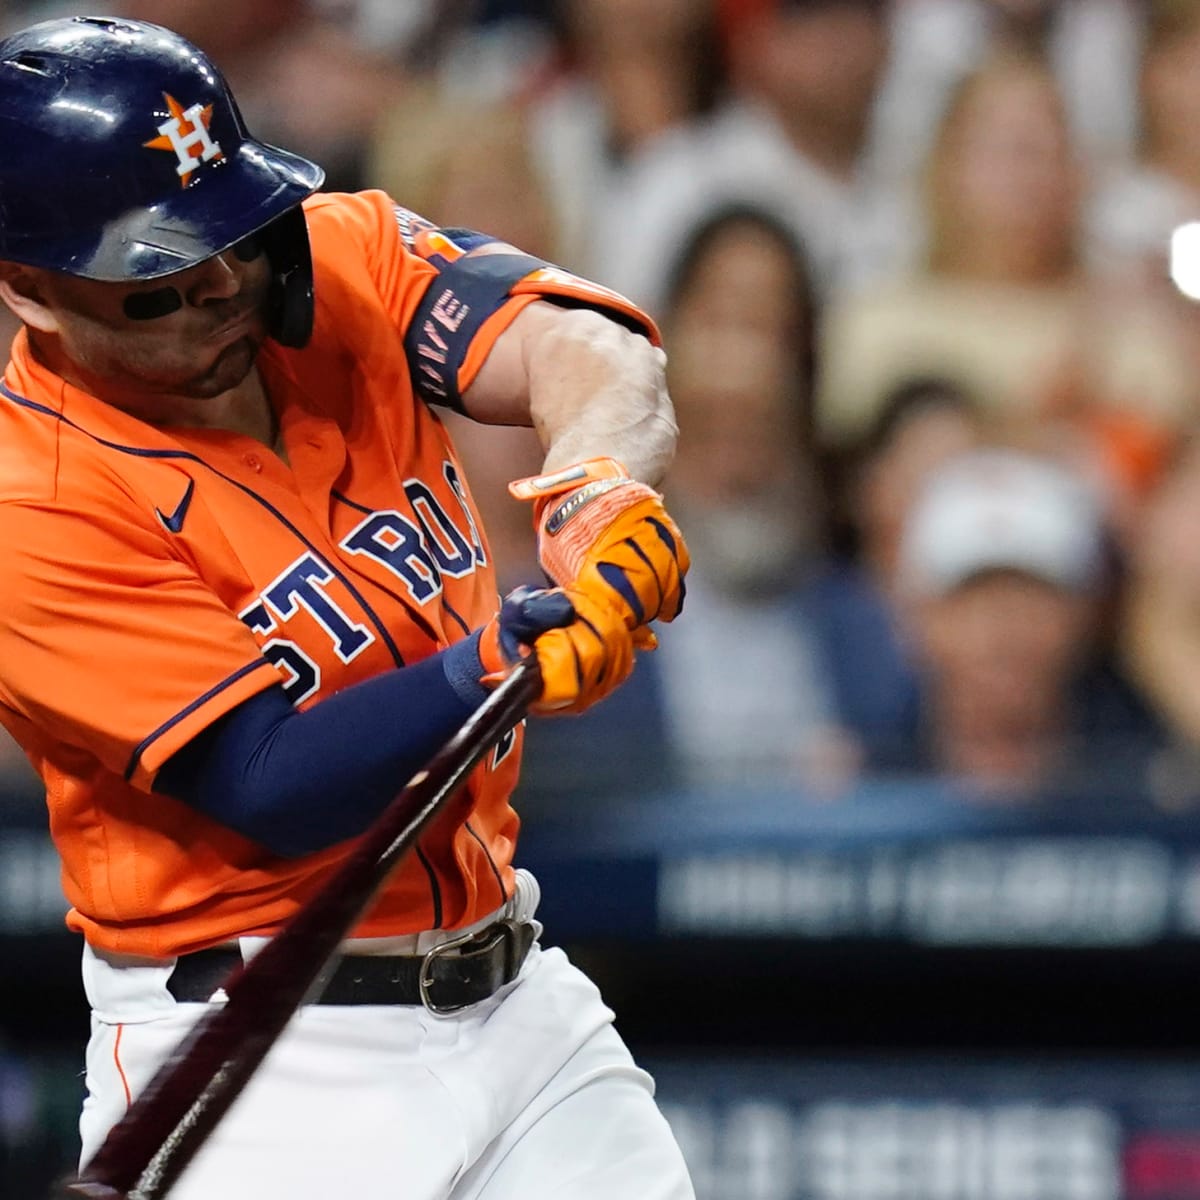 Jose Altuve helps lift Astros to World Series Game 2 win - The